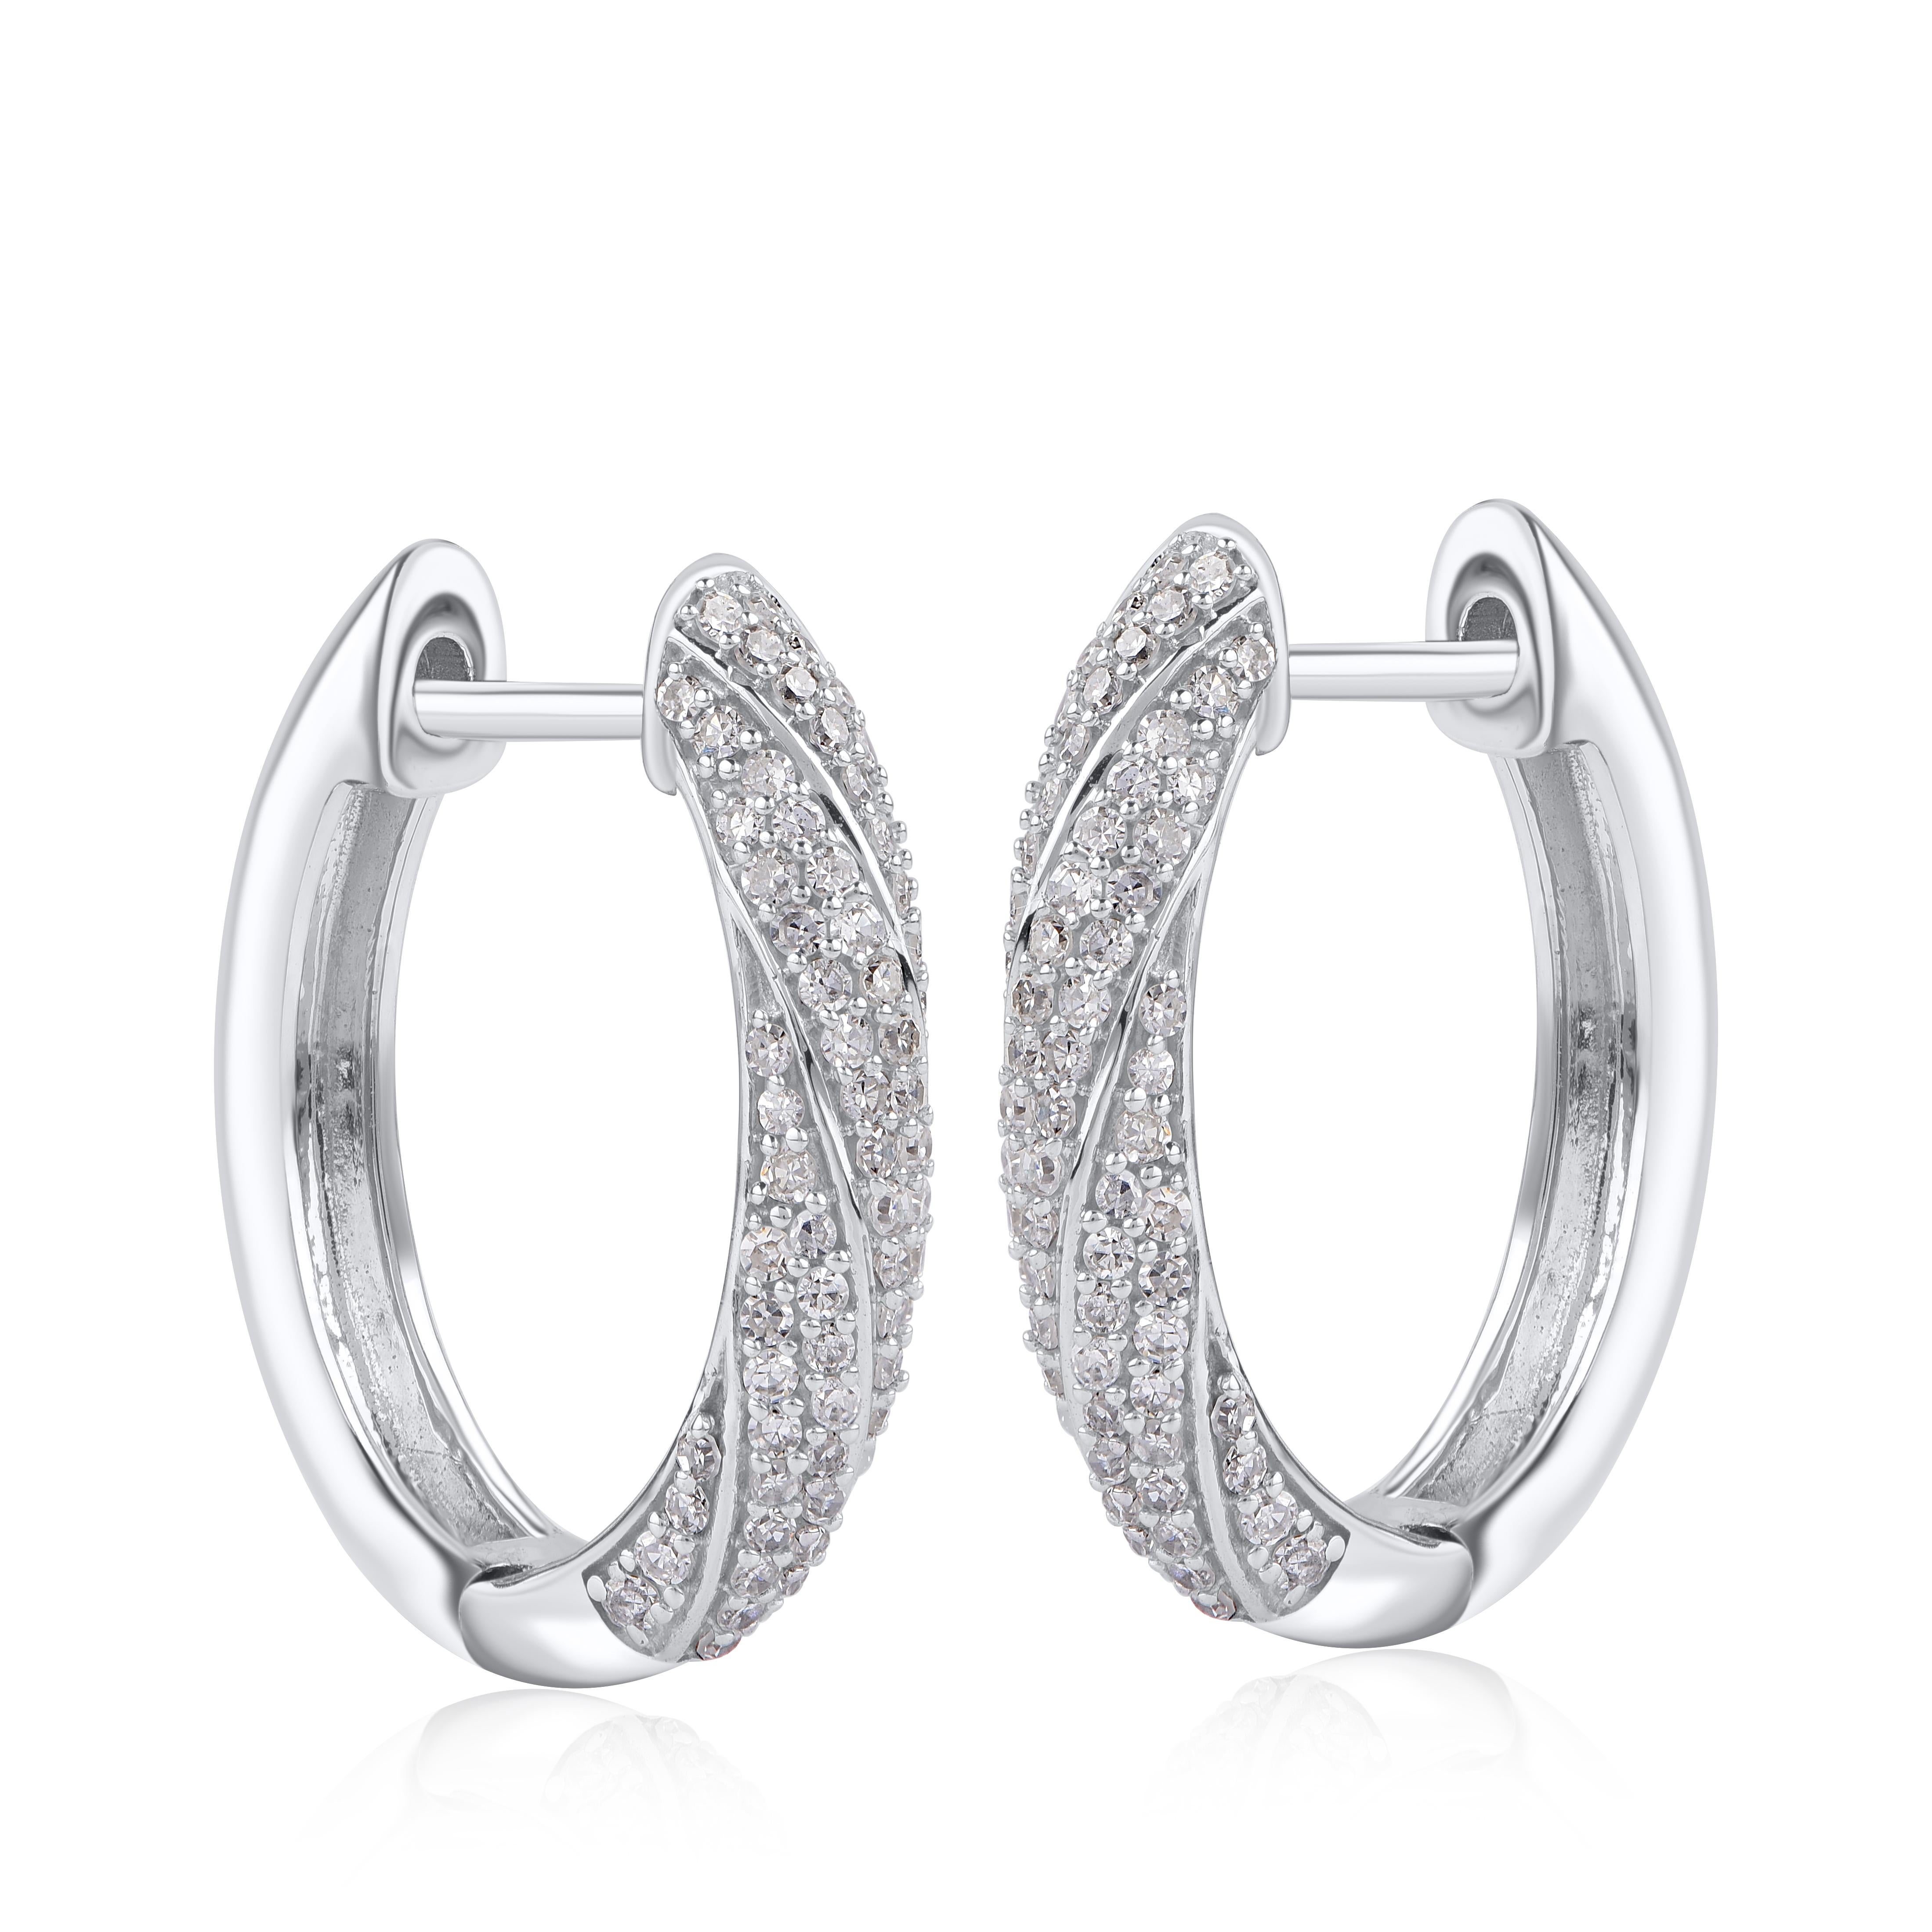 Bring charm to your look with this spiral design diamond hoop earrings. The earrings is crafted from 18-karat White gold and features Round- 160 Natural white diamond set in pave setting and shines in H-I color I2 clarity. A high polish finish